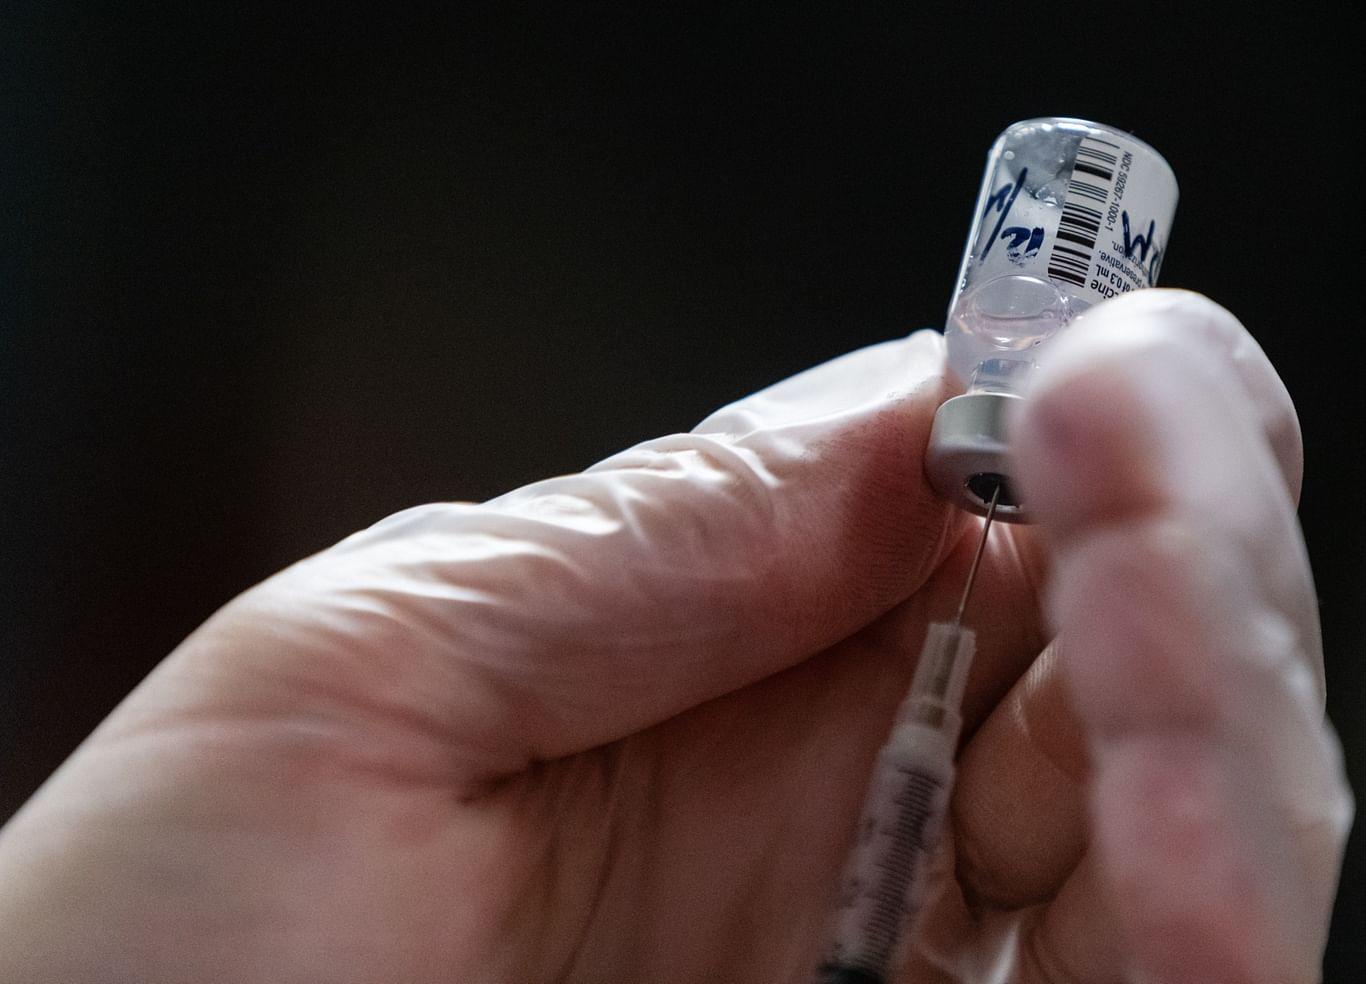 India To Conduct Dry Run For Vaccine Administration In All States On Jan. 2